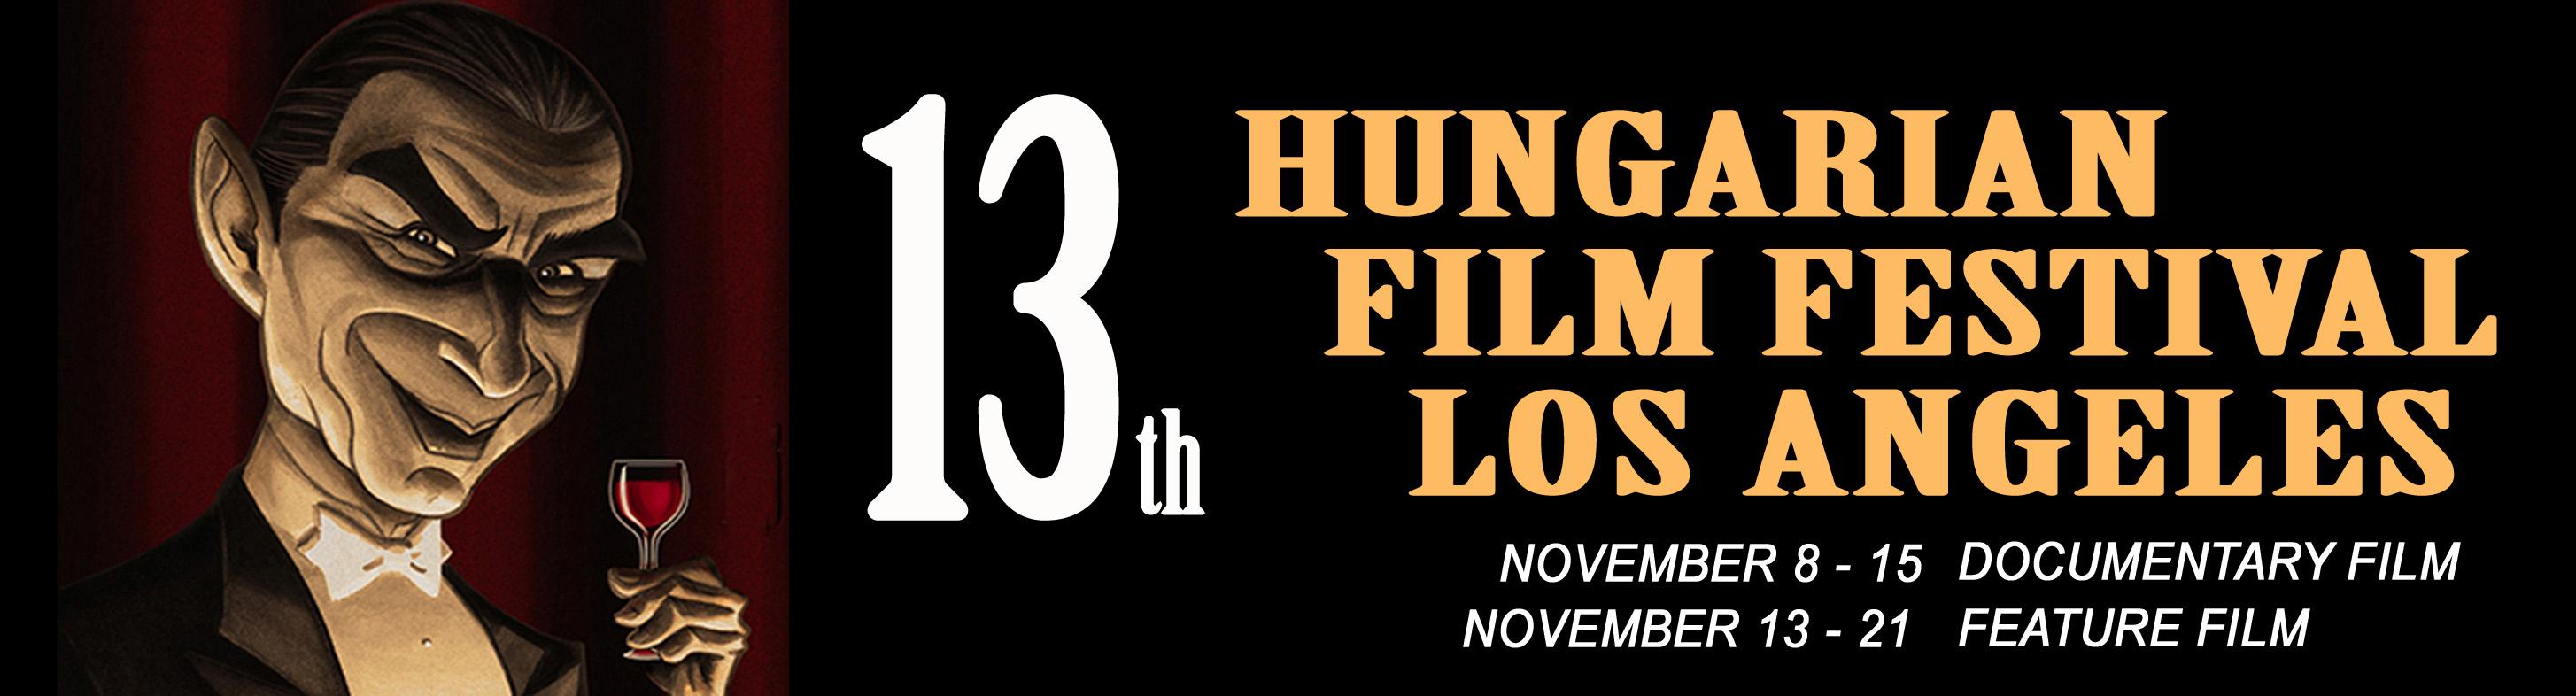 Hungarian Film Festival Opens In Los Angeles